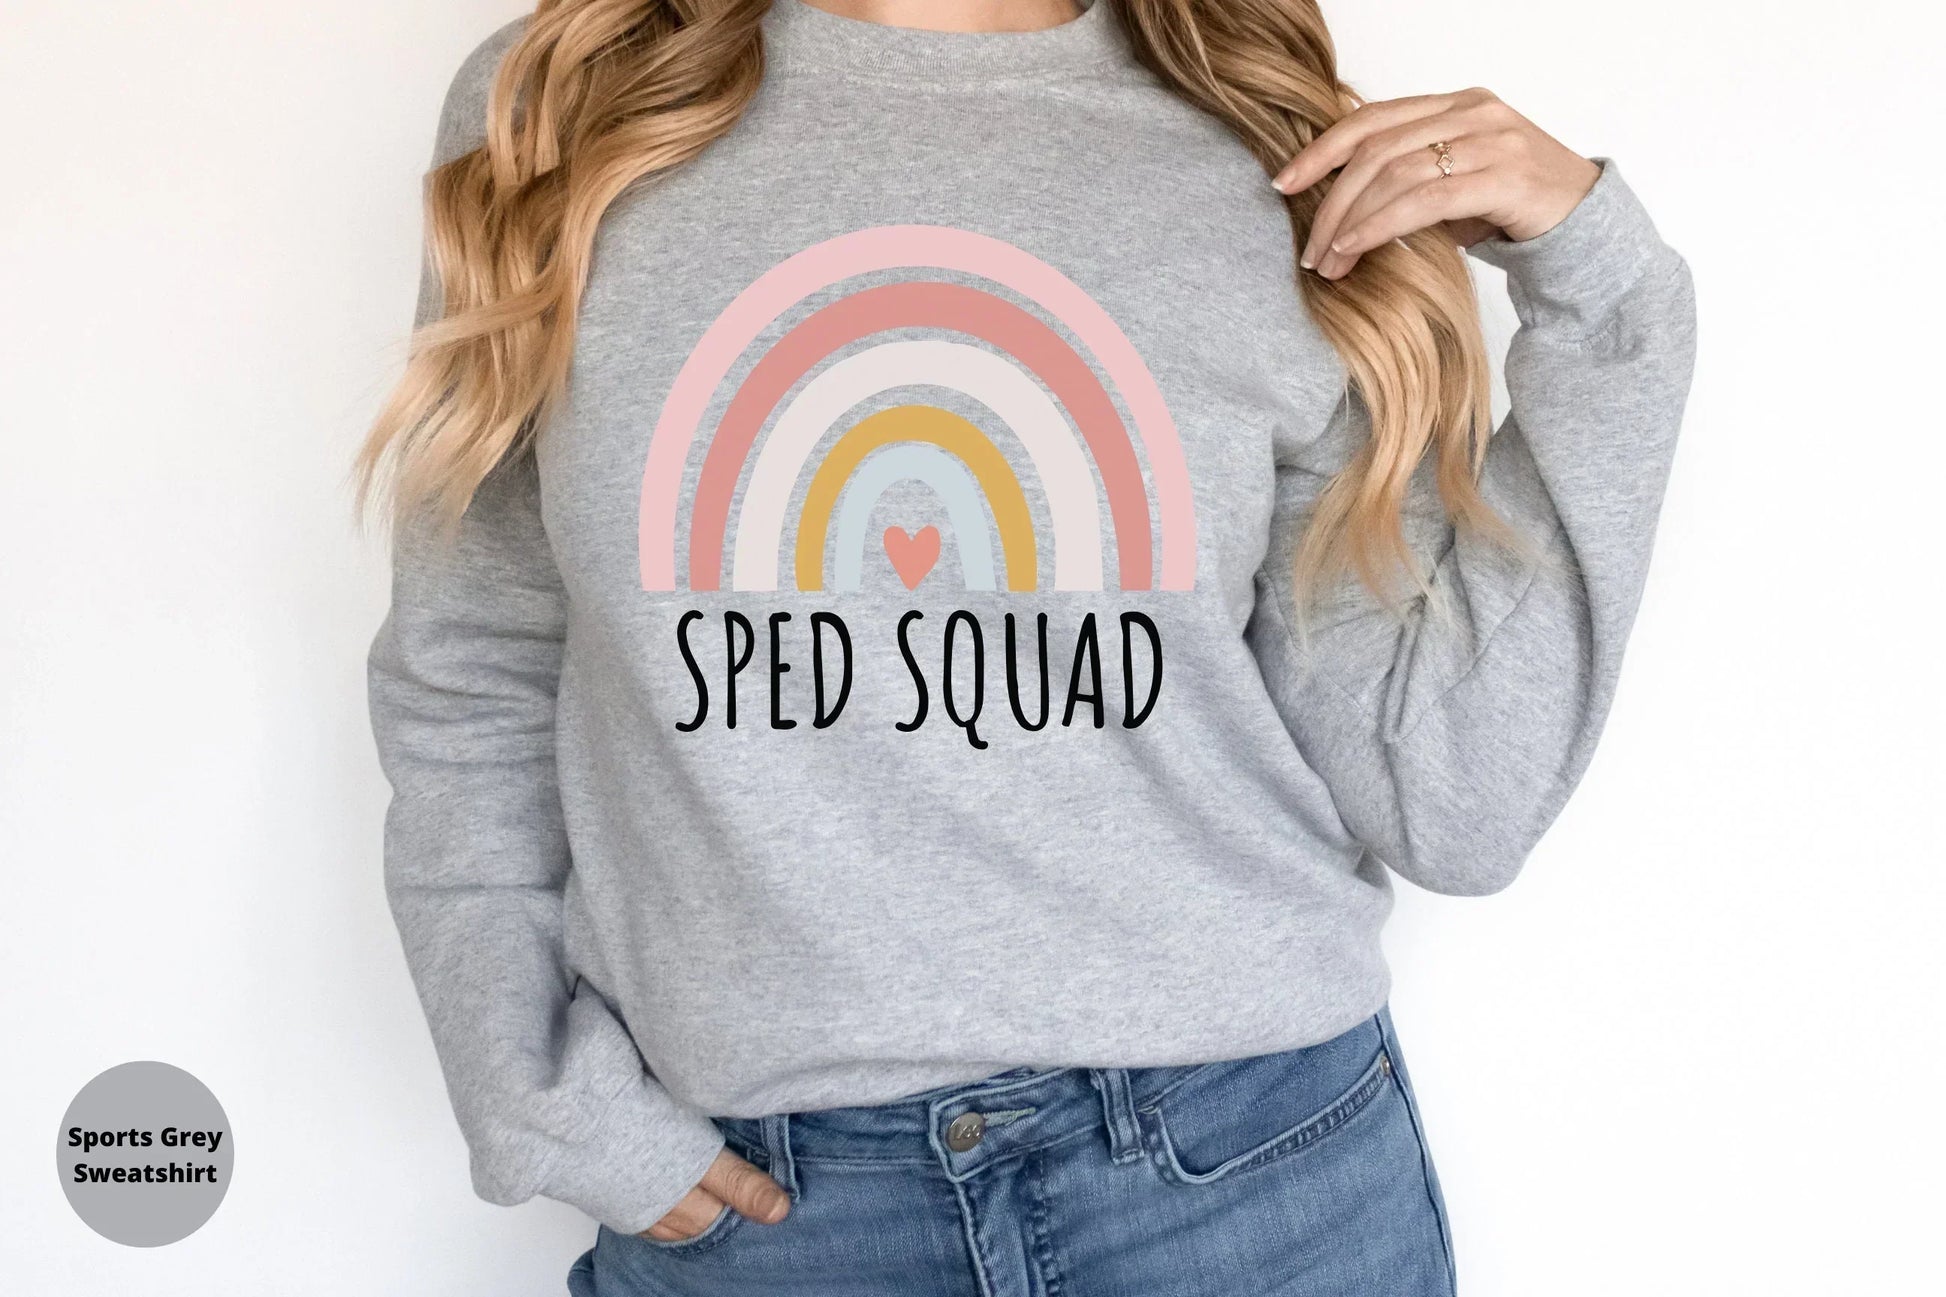 SPED Teacher Shirt, SPED Squad, Special Education Teacher, Teacher Teams, Elementary Teacher, Inclusion Tee, SPED Gifts , Autism Awareness HMDesignStudioUS